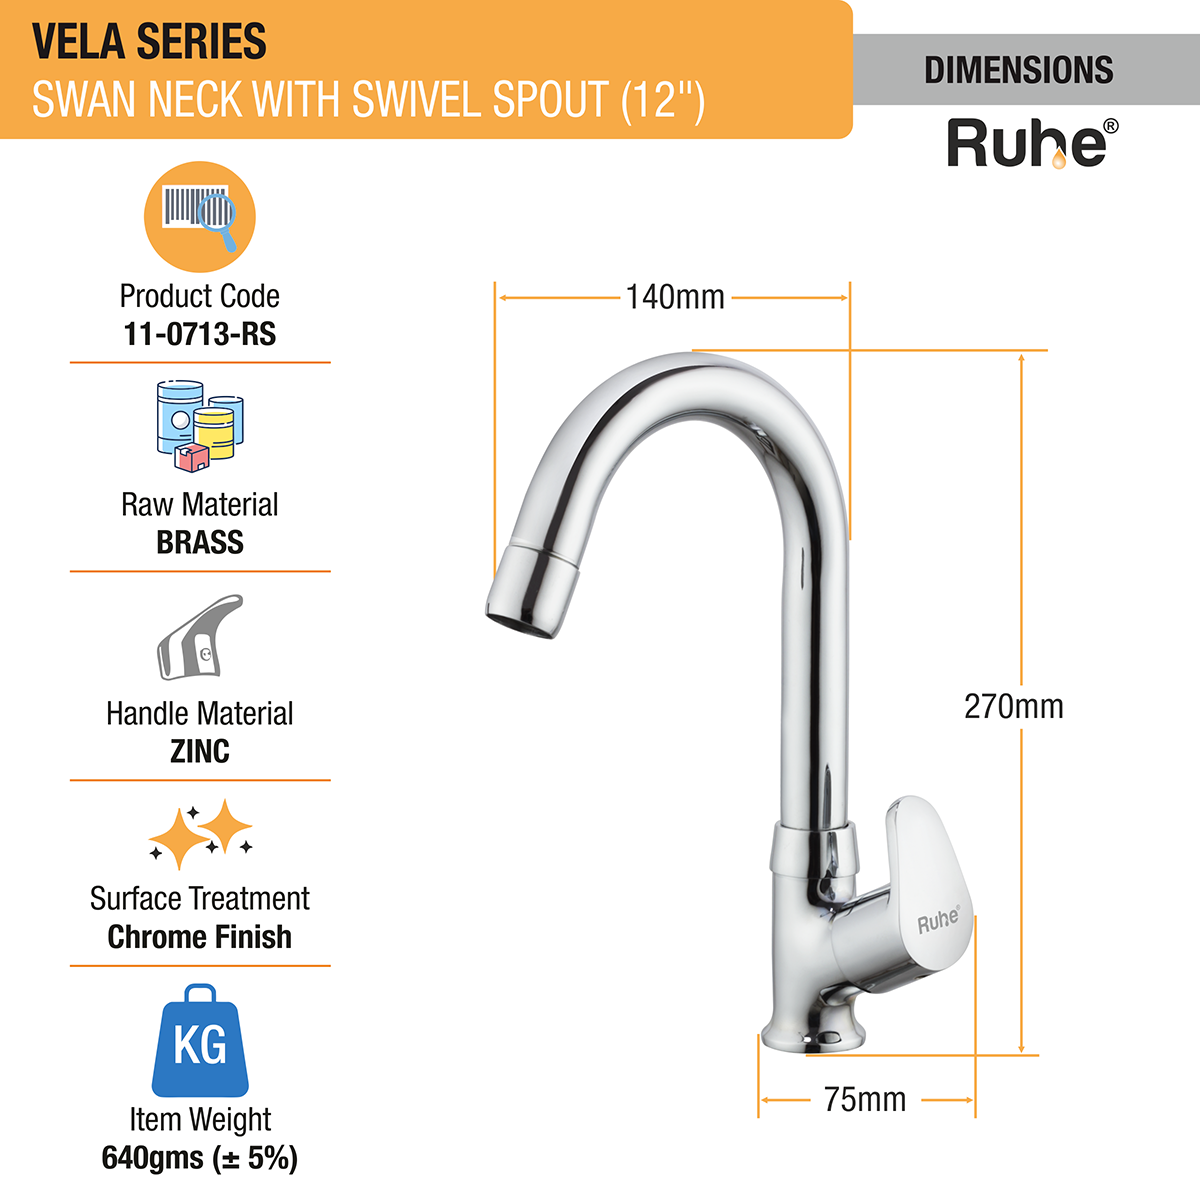 Vela Swan Neck with Small (12 inches) Round Swivel Spout Brass Faucet dimensions and size